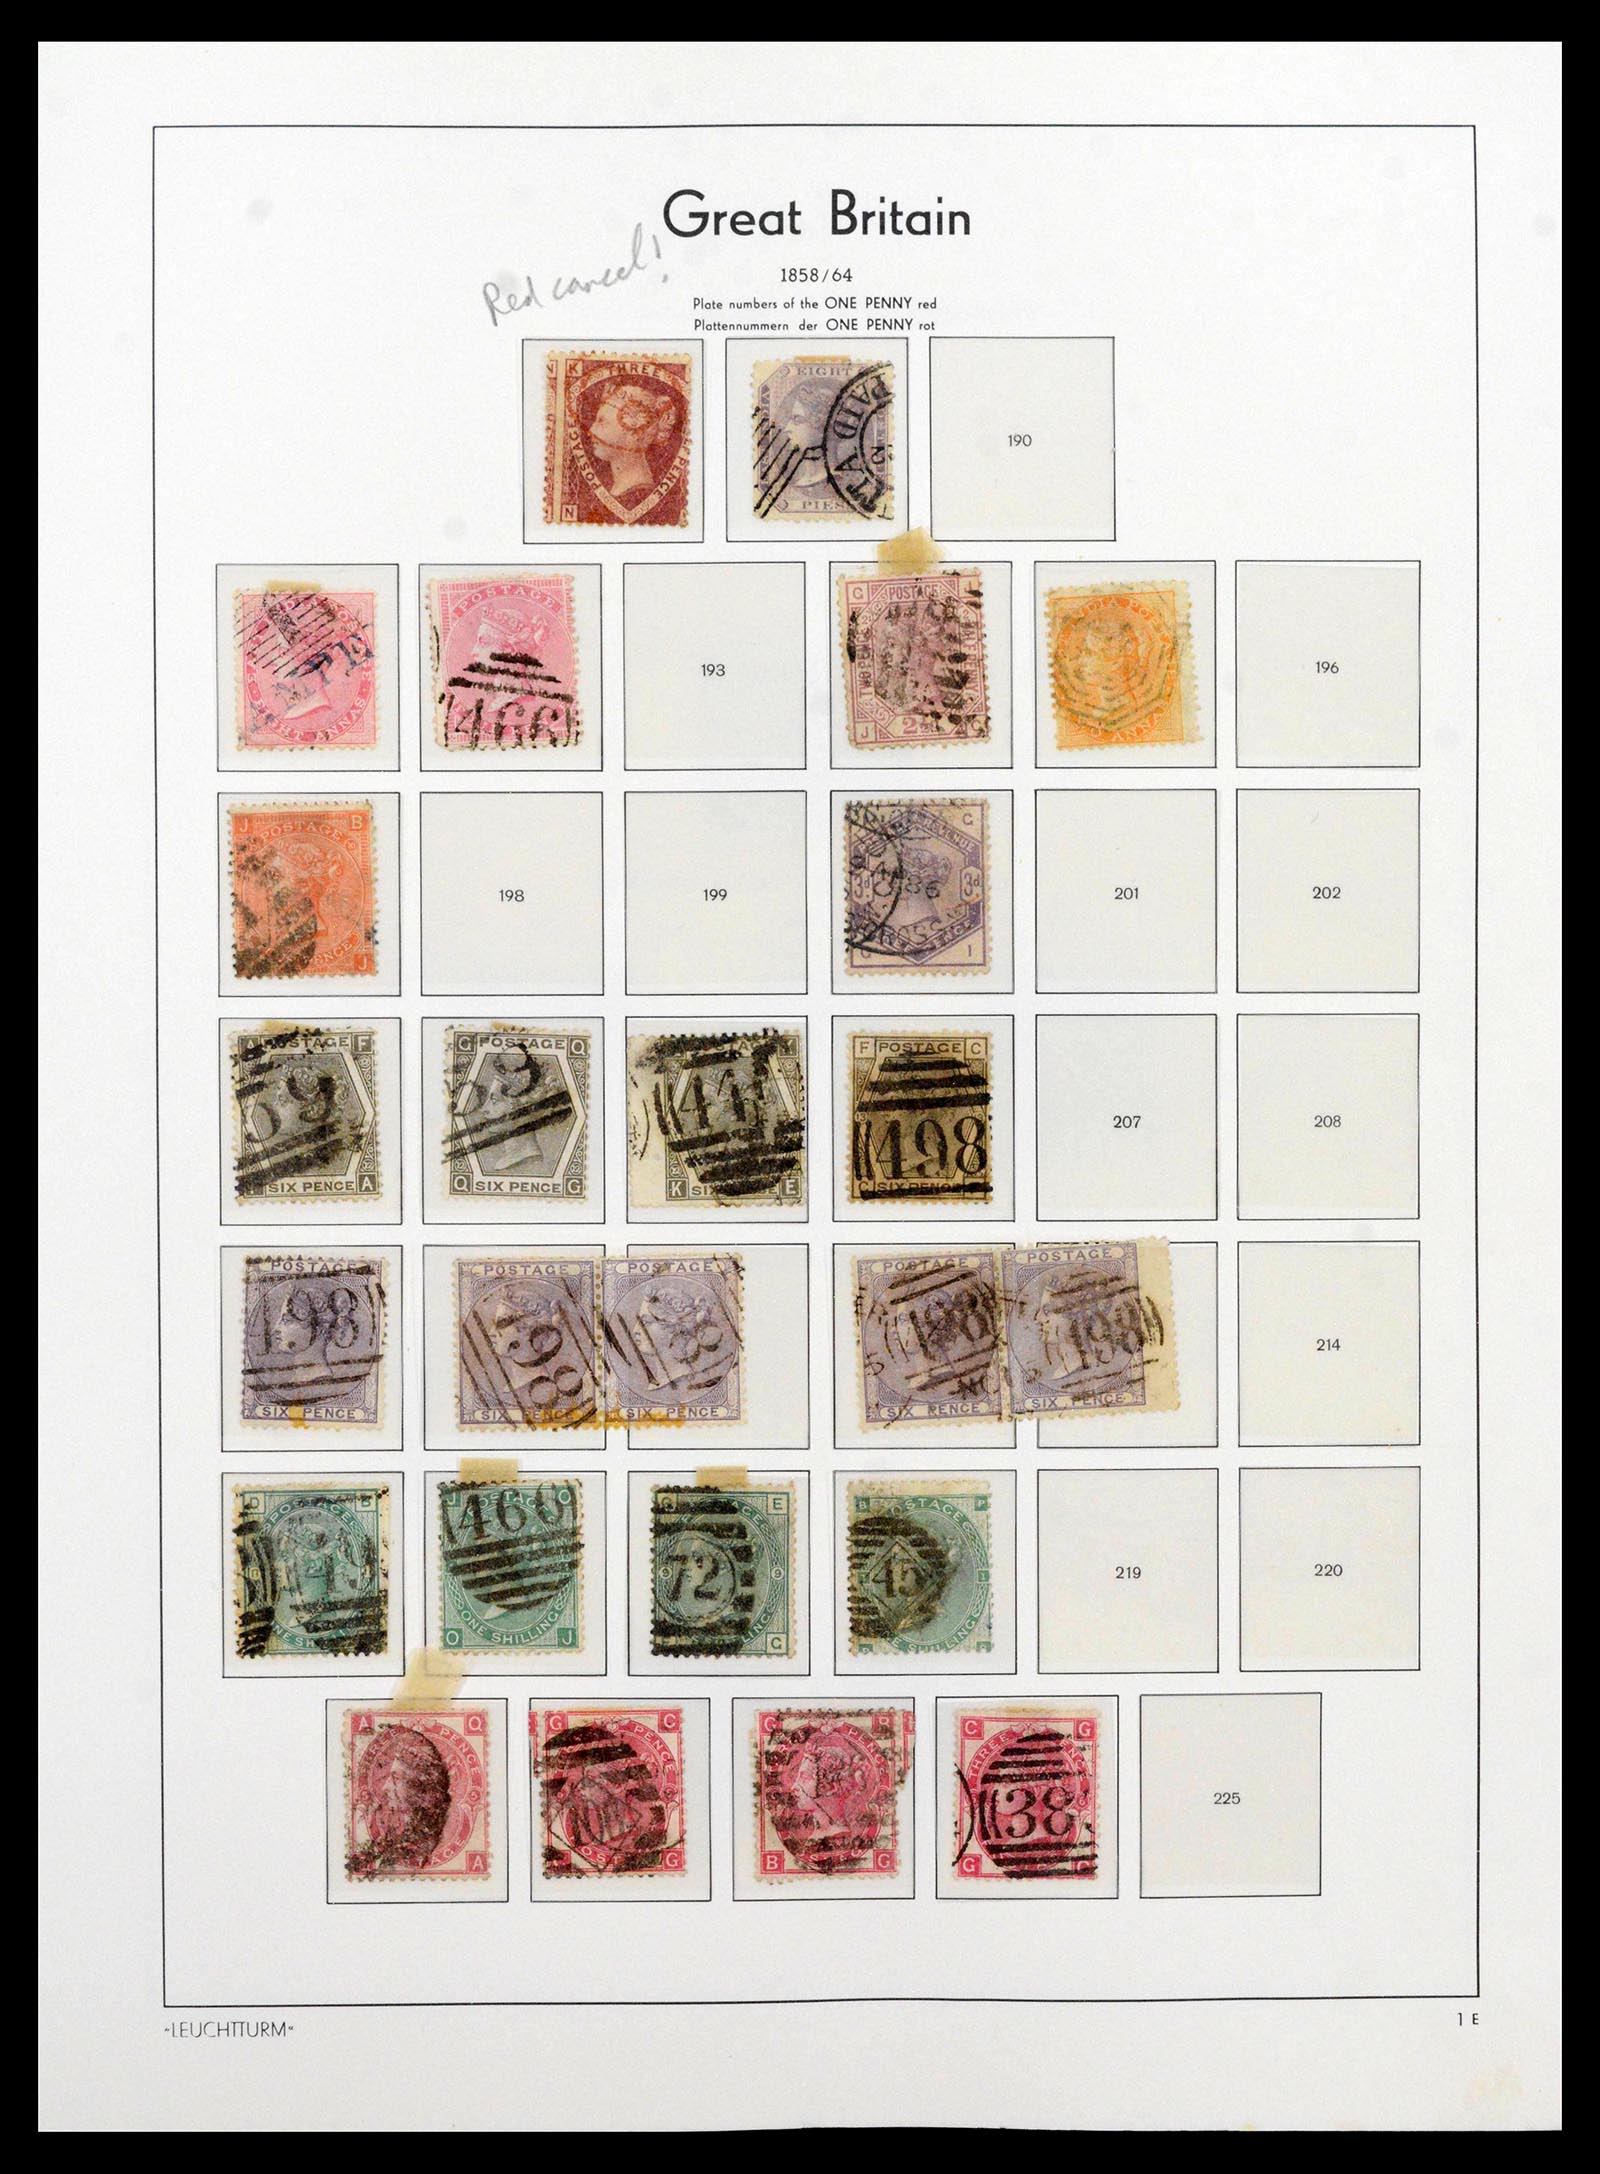 39150 0005 - Stamp collection 39150 Great Britain 1840-1984.